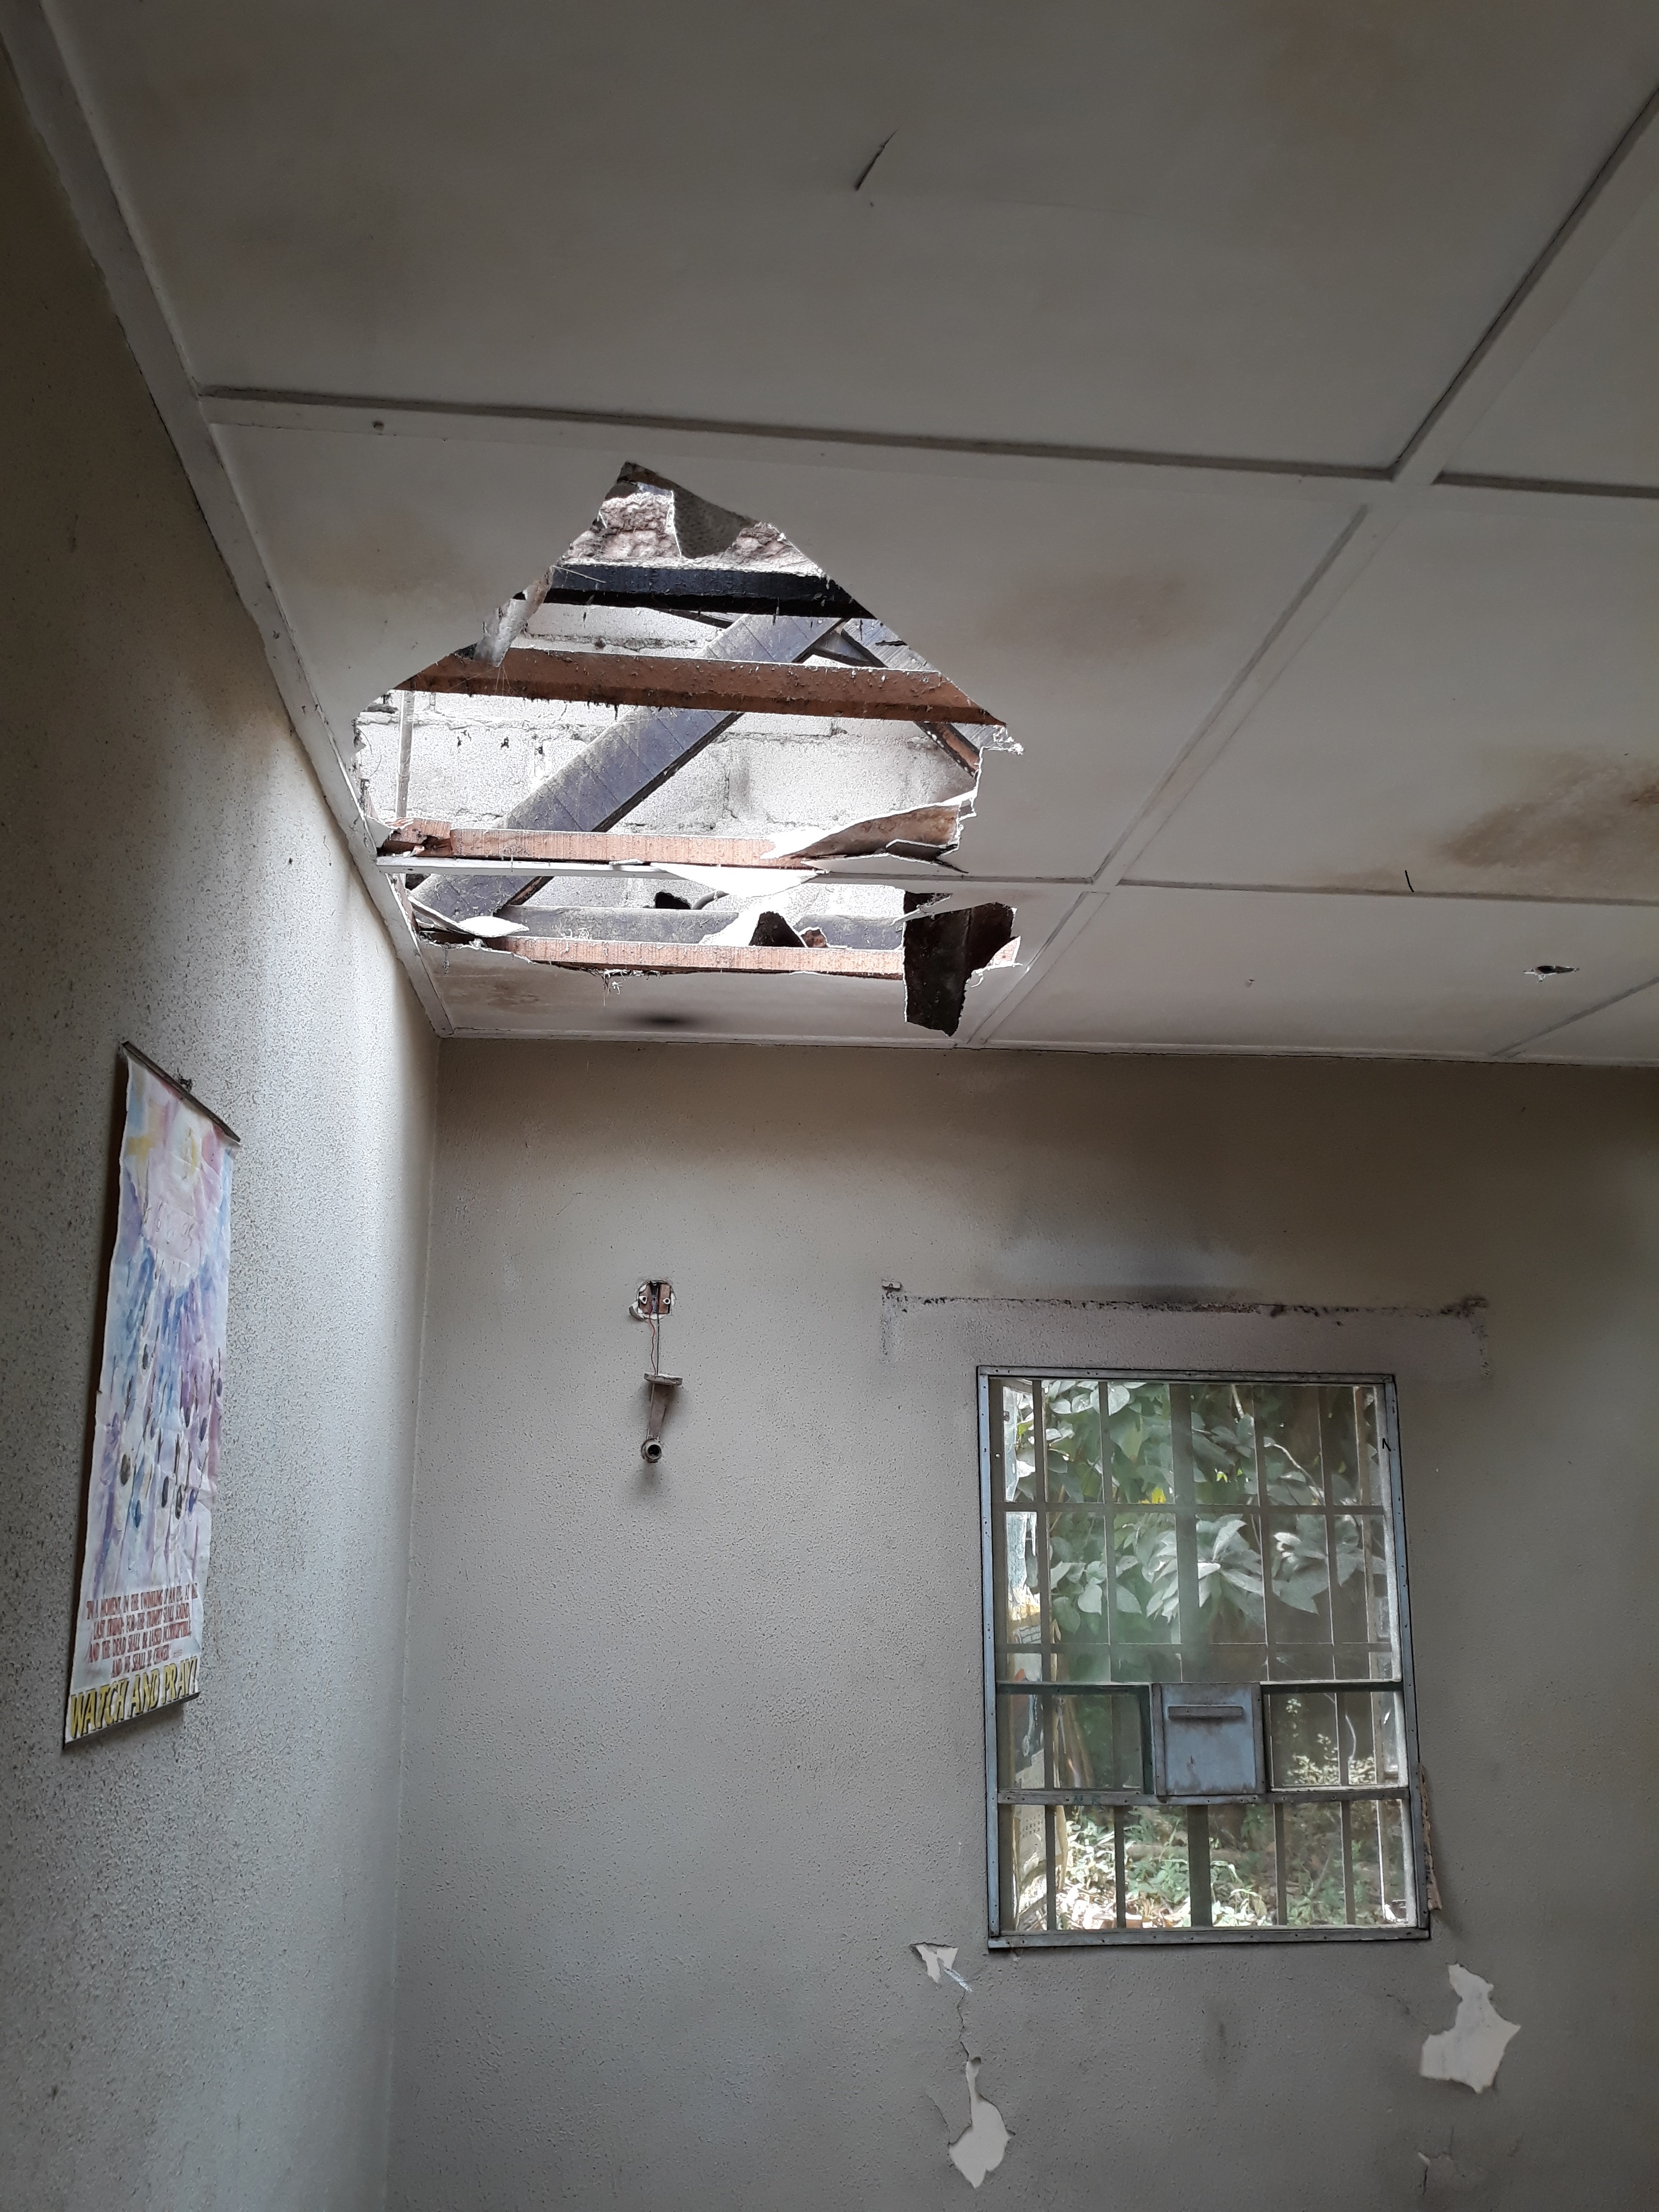 There were several holes punctured in the ceiling of the Obidike home (Credit: Pulse)